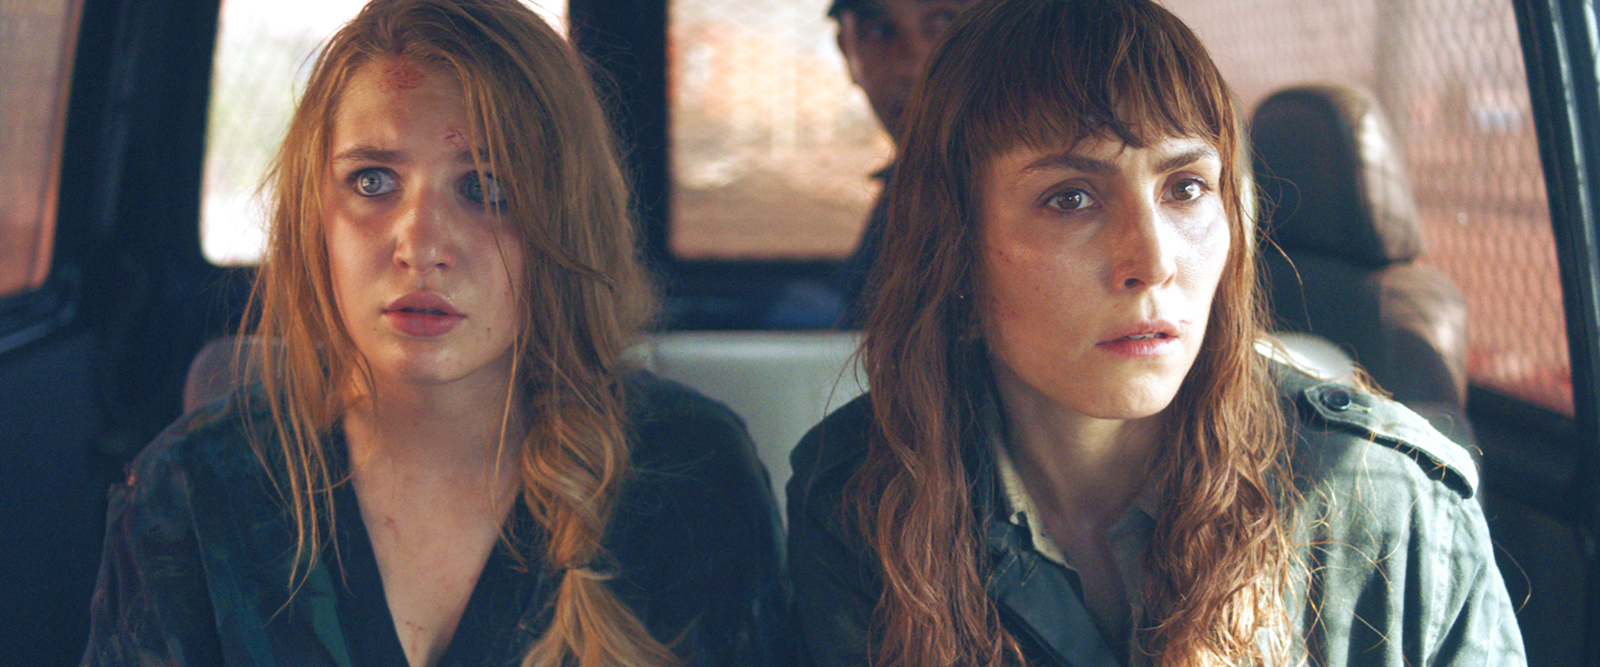 Sophie Nelisse and Noomi Rapace in Close.